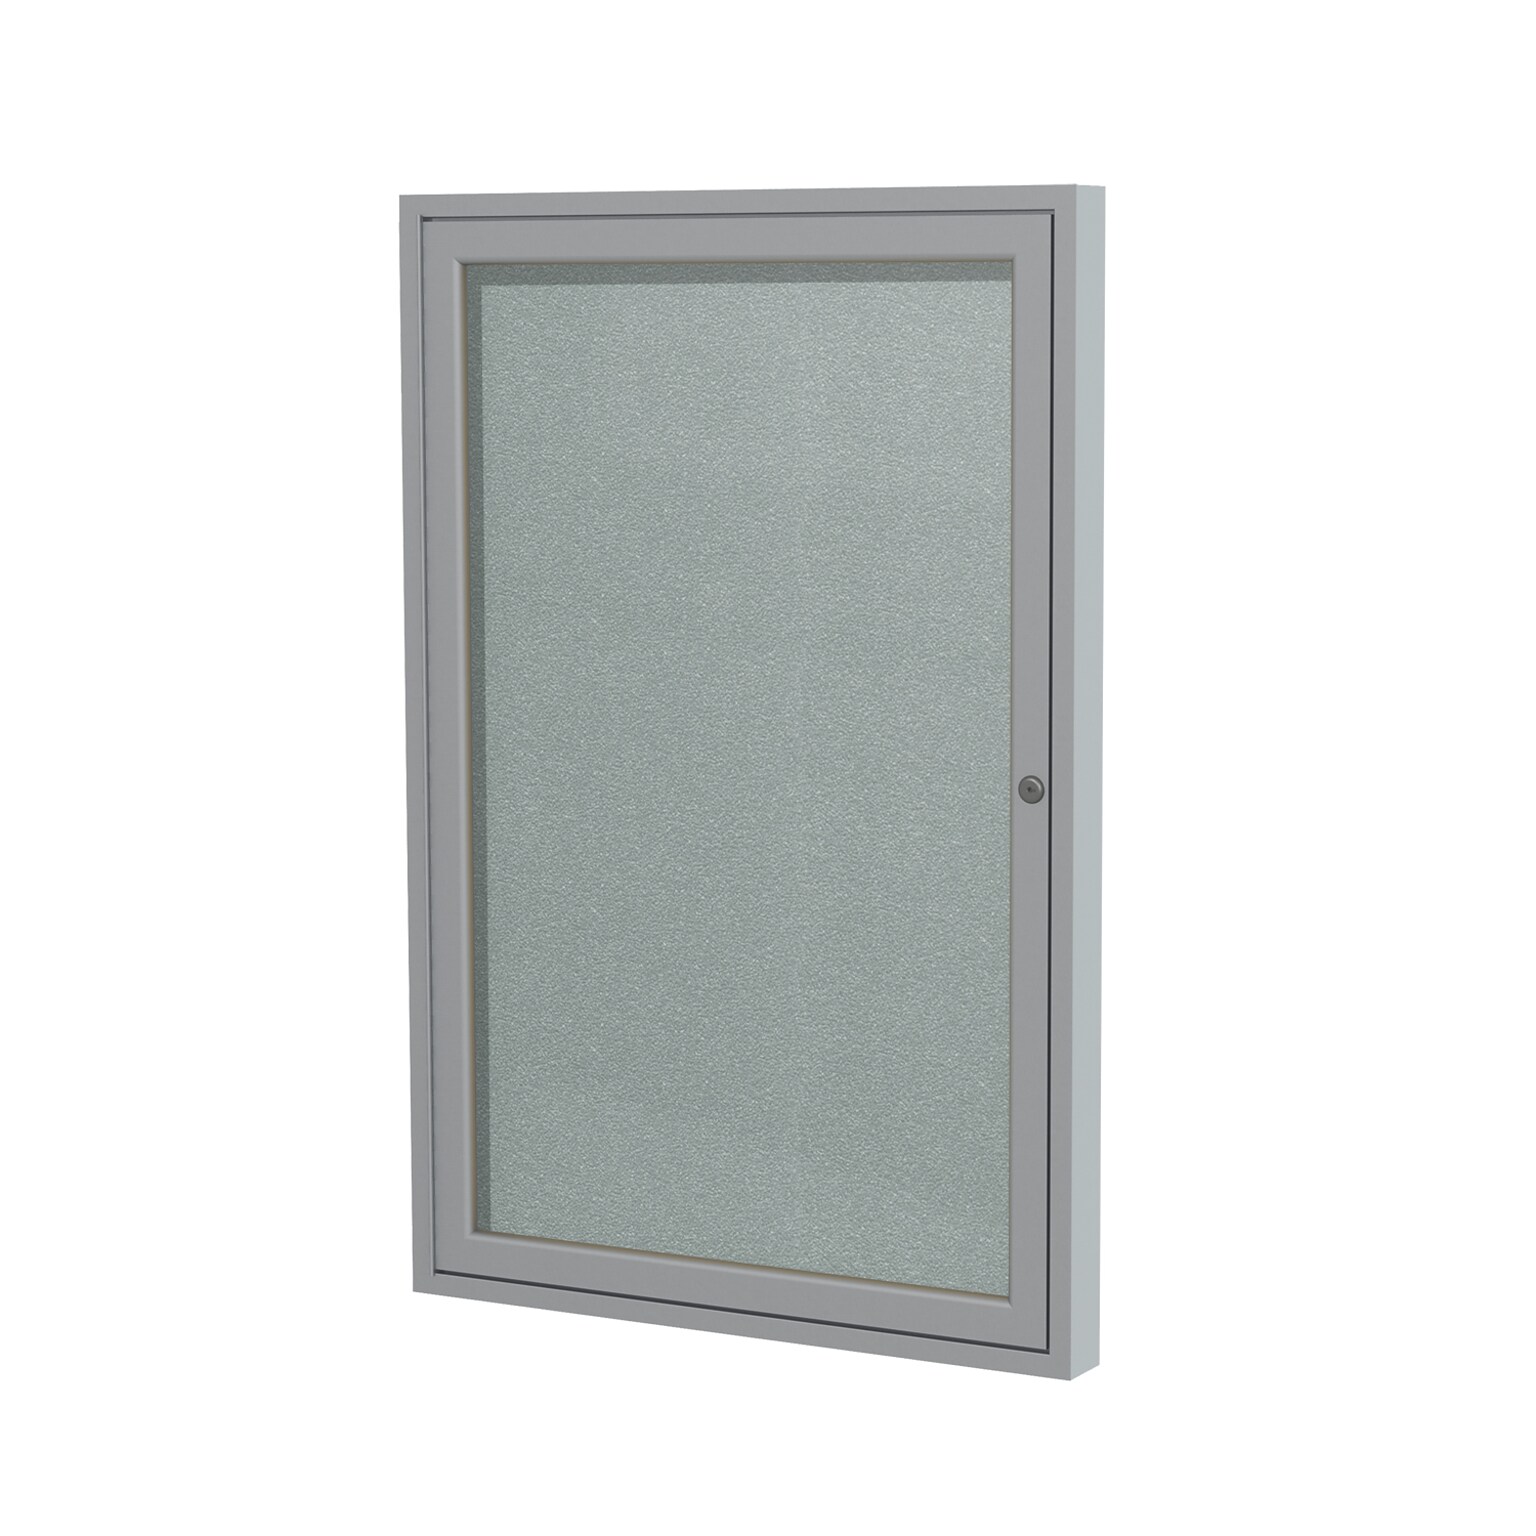 Ghent 3 H x 2 W Enclosed Vinyl Bulletin Board with Satin Frame, 1 Door, Silver (PA13624VX-193)